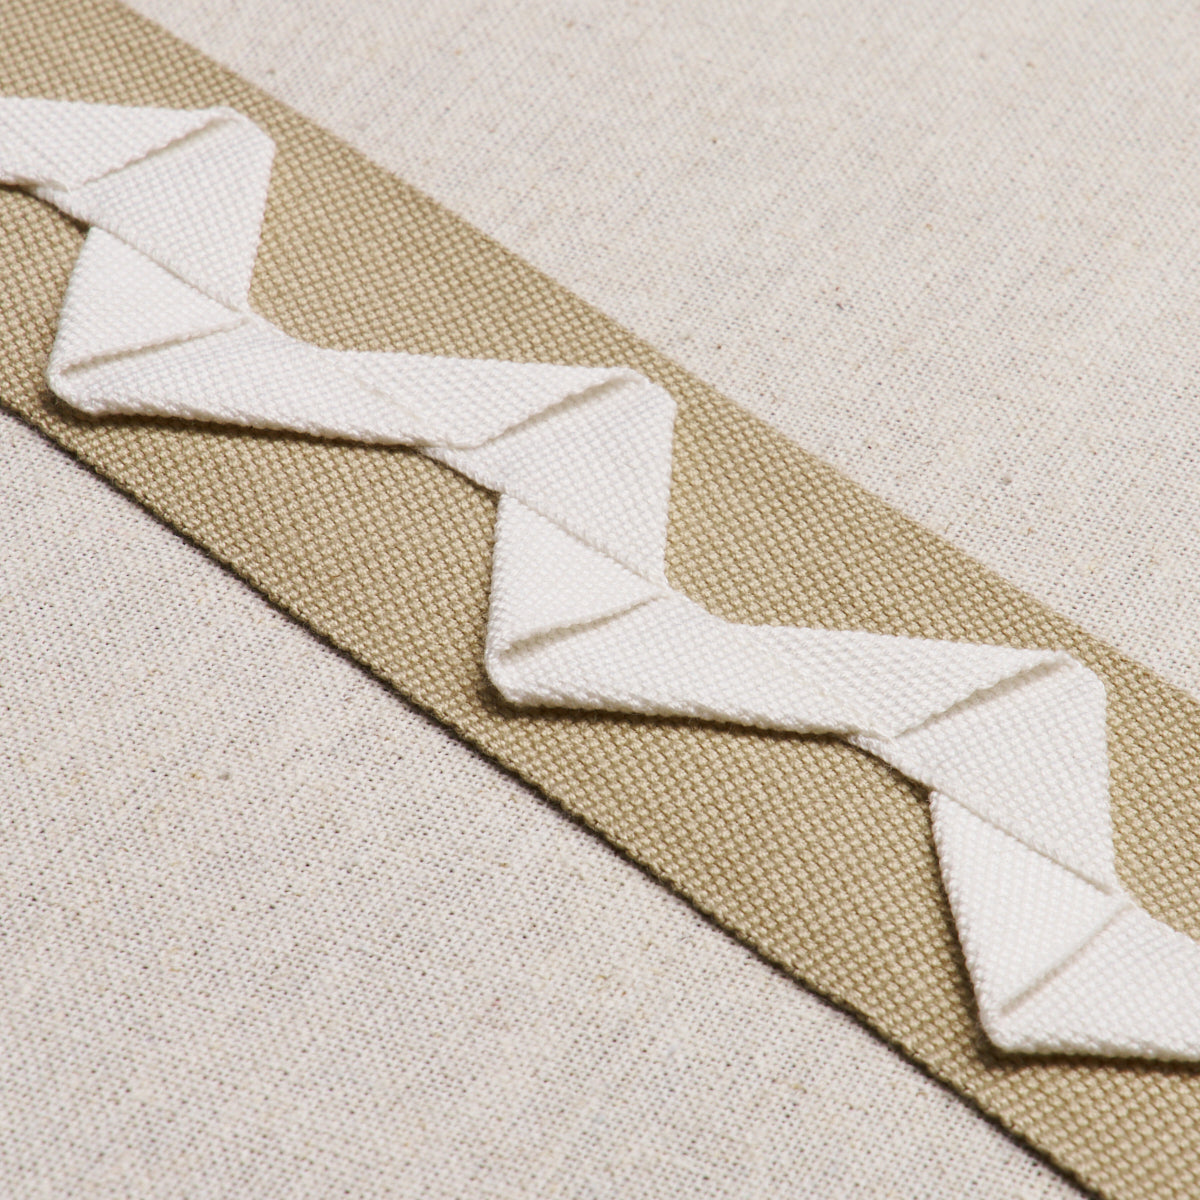 LAZARE APPLIQUÉ TAPE | IVORY ON NATURAL